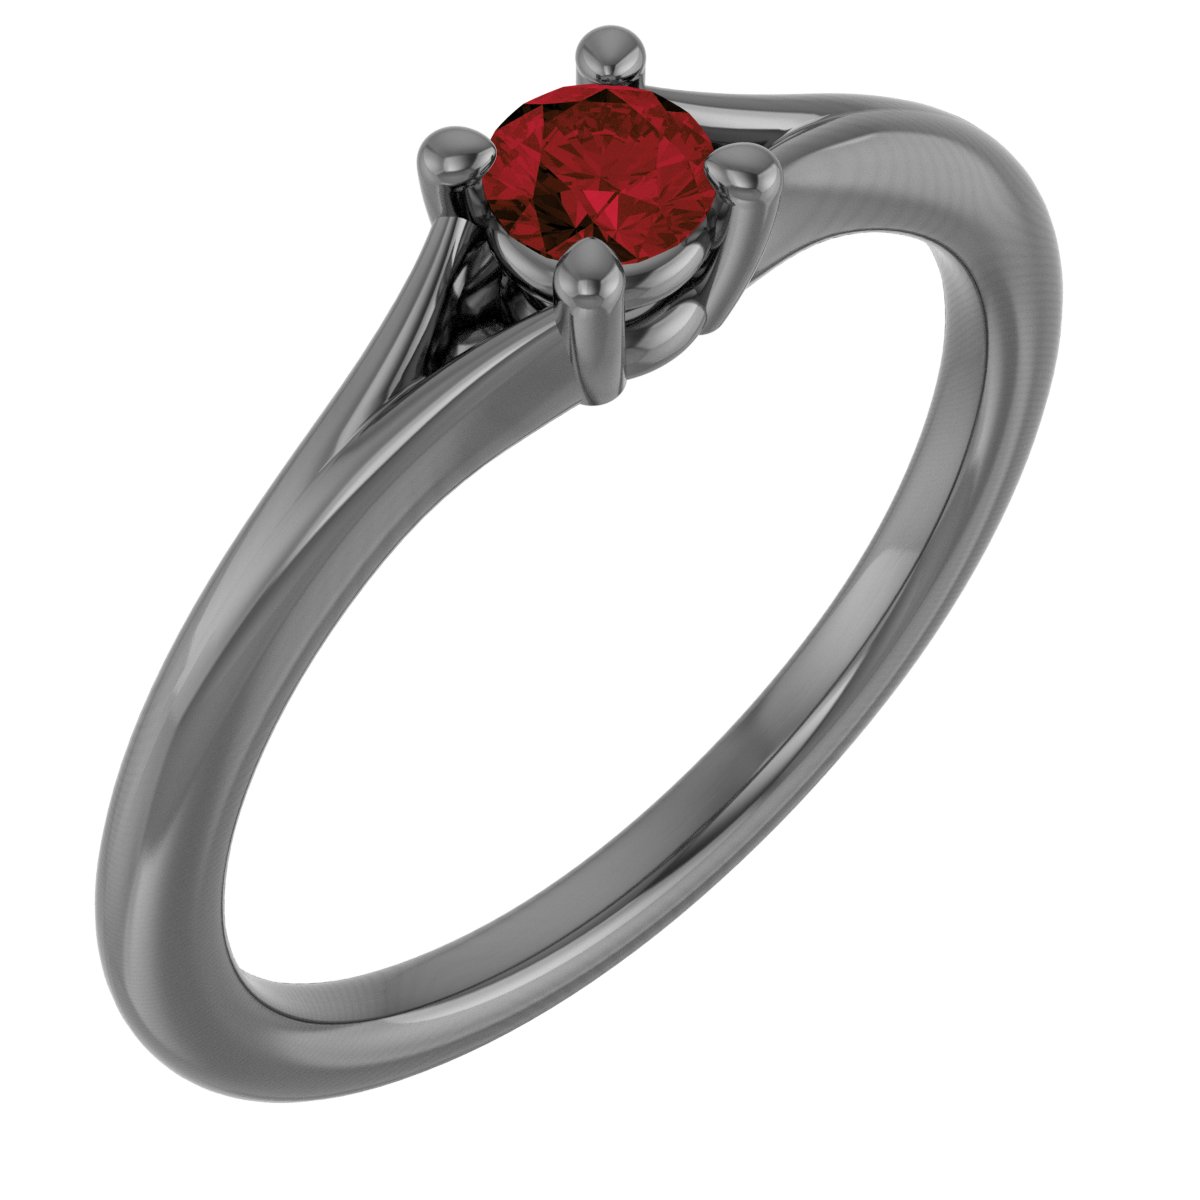 14K Yellow Mozambique Garnet Youth Solitaire Ring